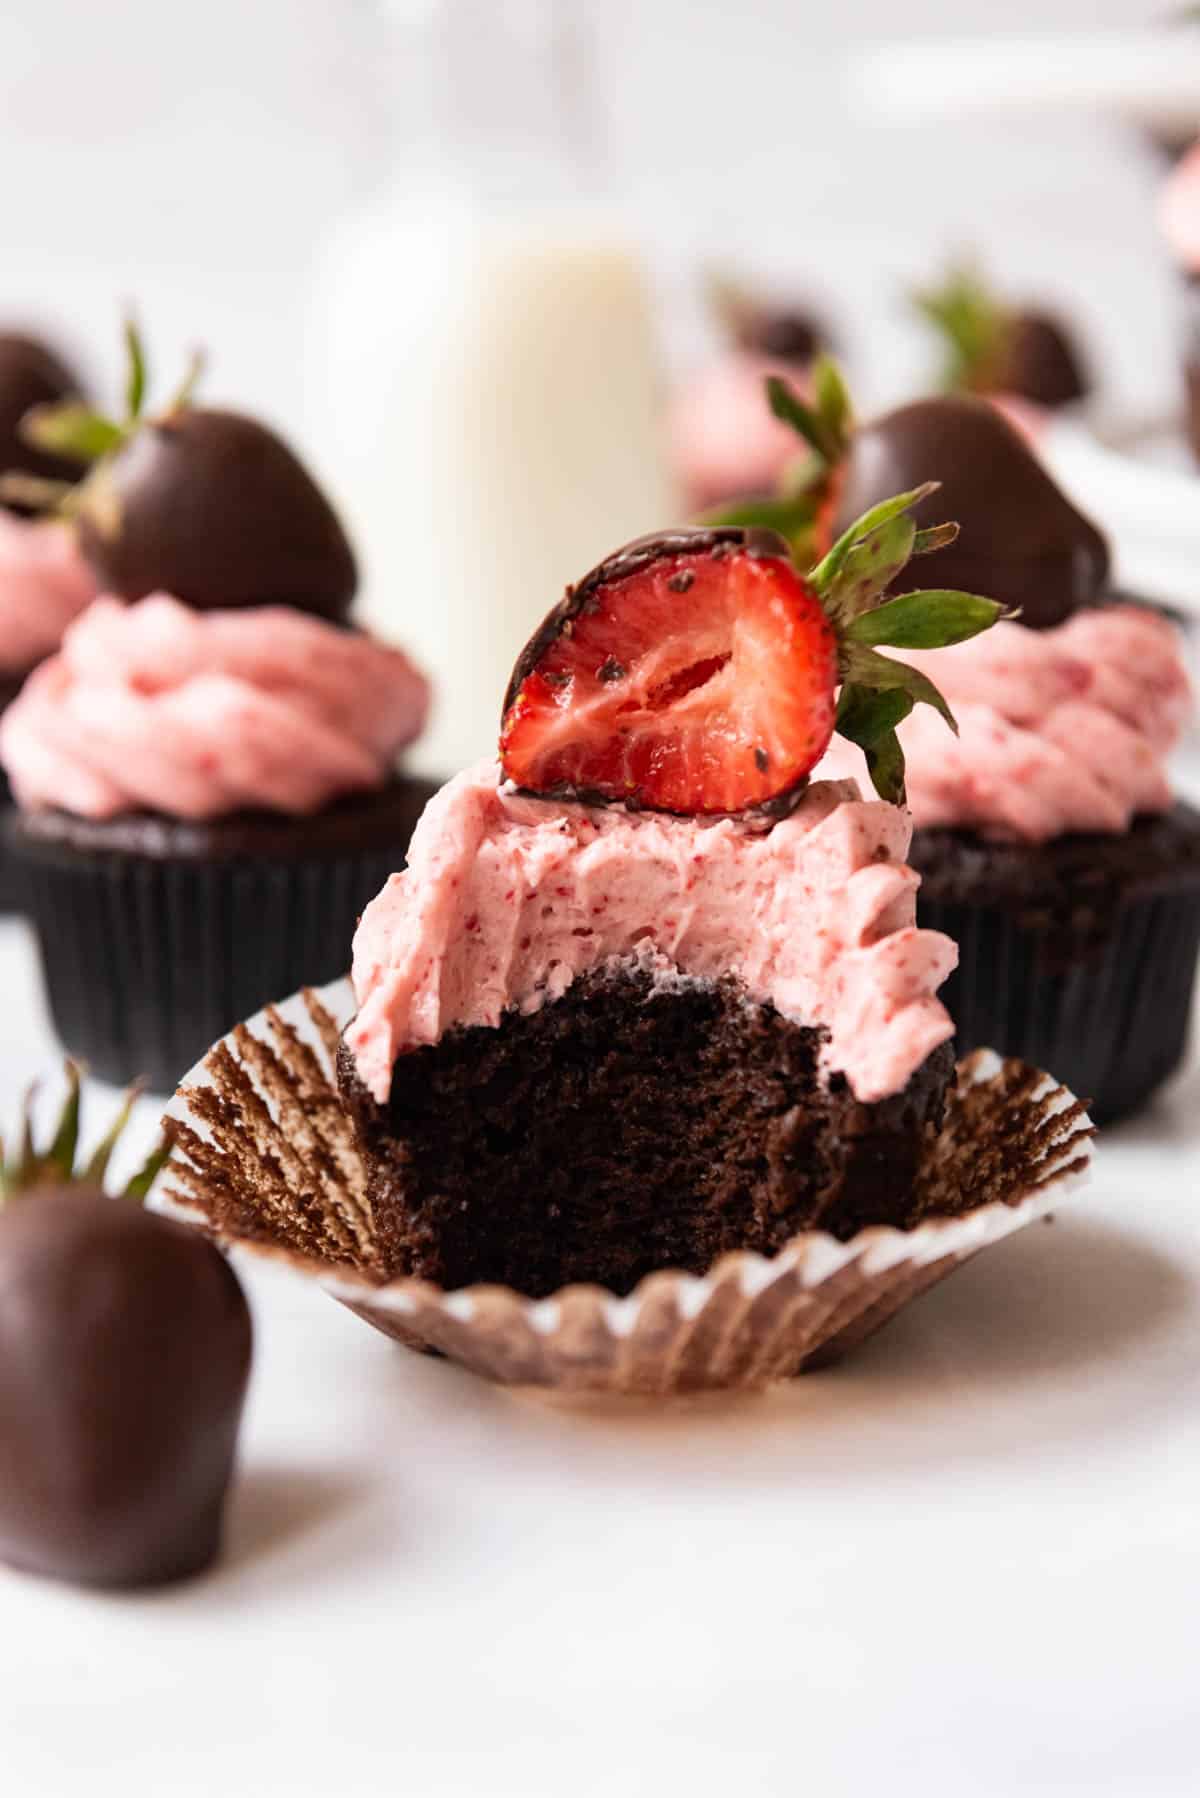 A moist chocolate cupcake with strawberry buttercream frosting and a chocolate covered strawberry on top with a bite taken out of the whole thing.